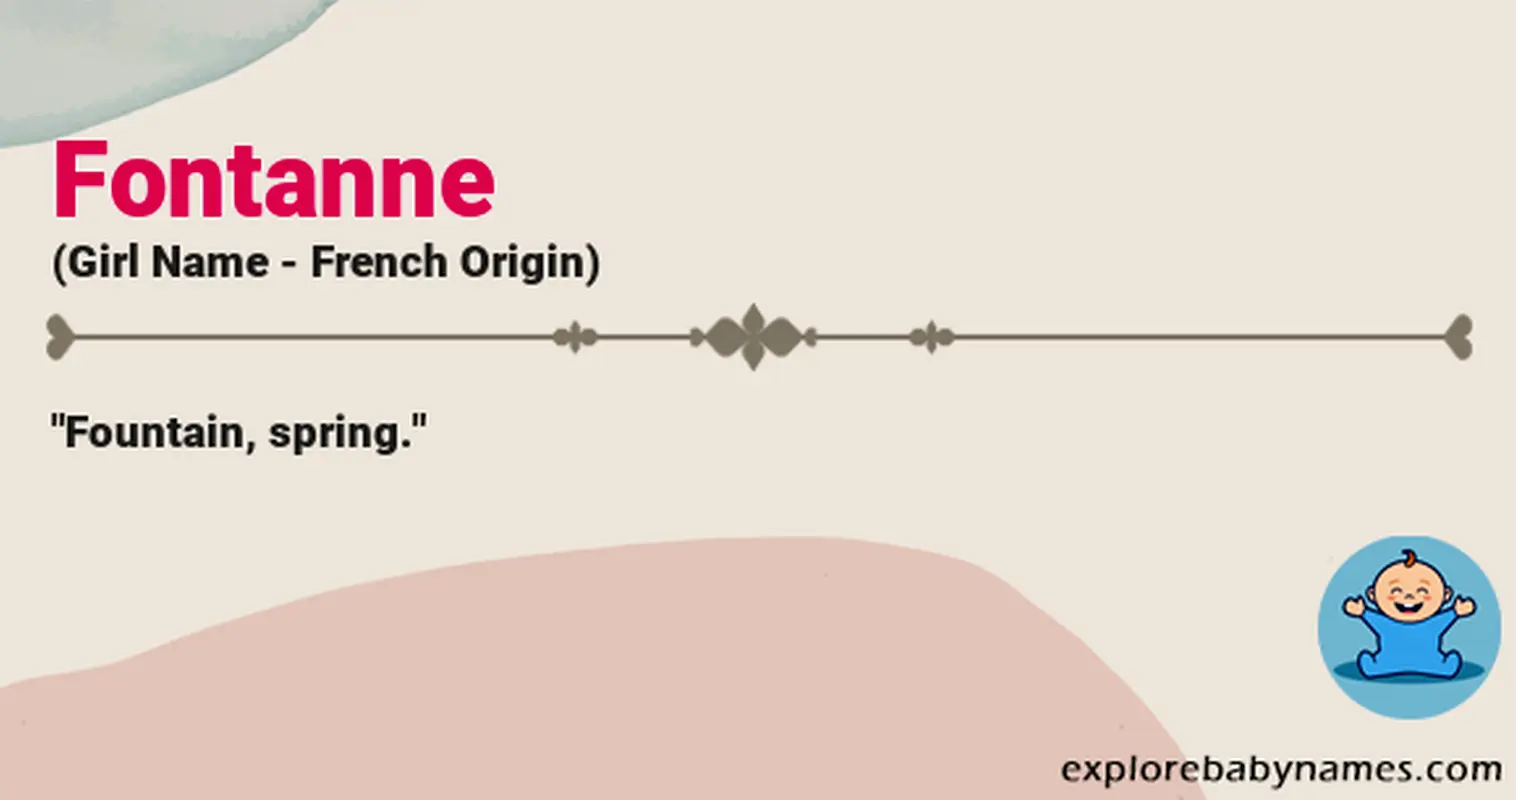 Meaning of Fontanne